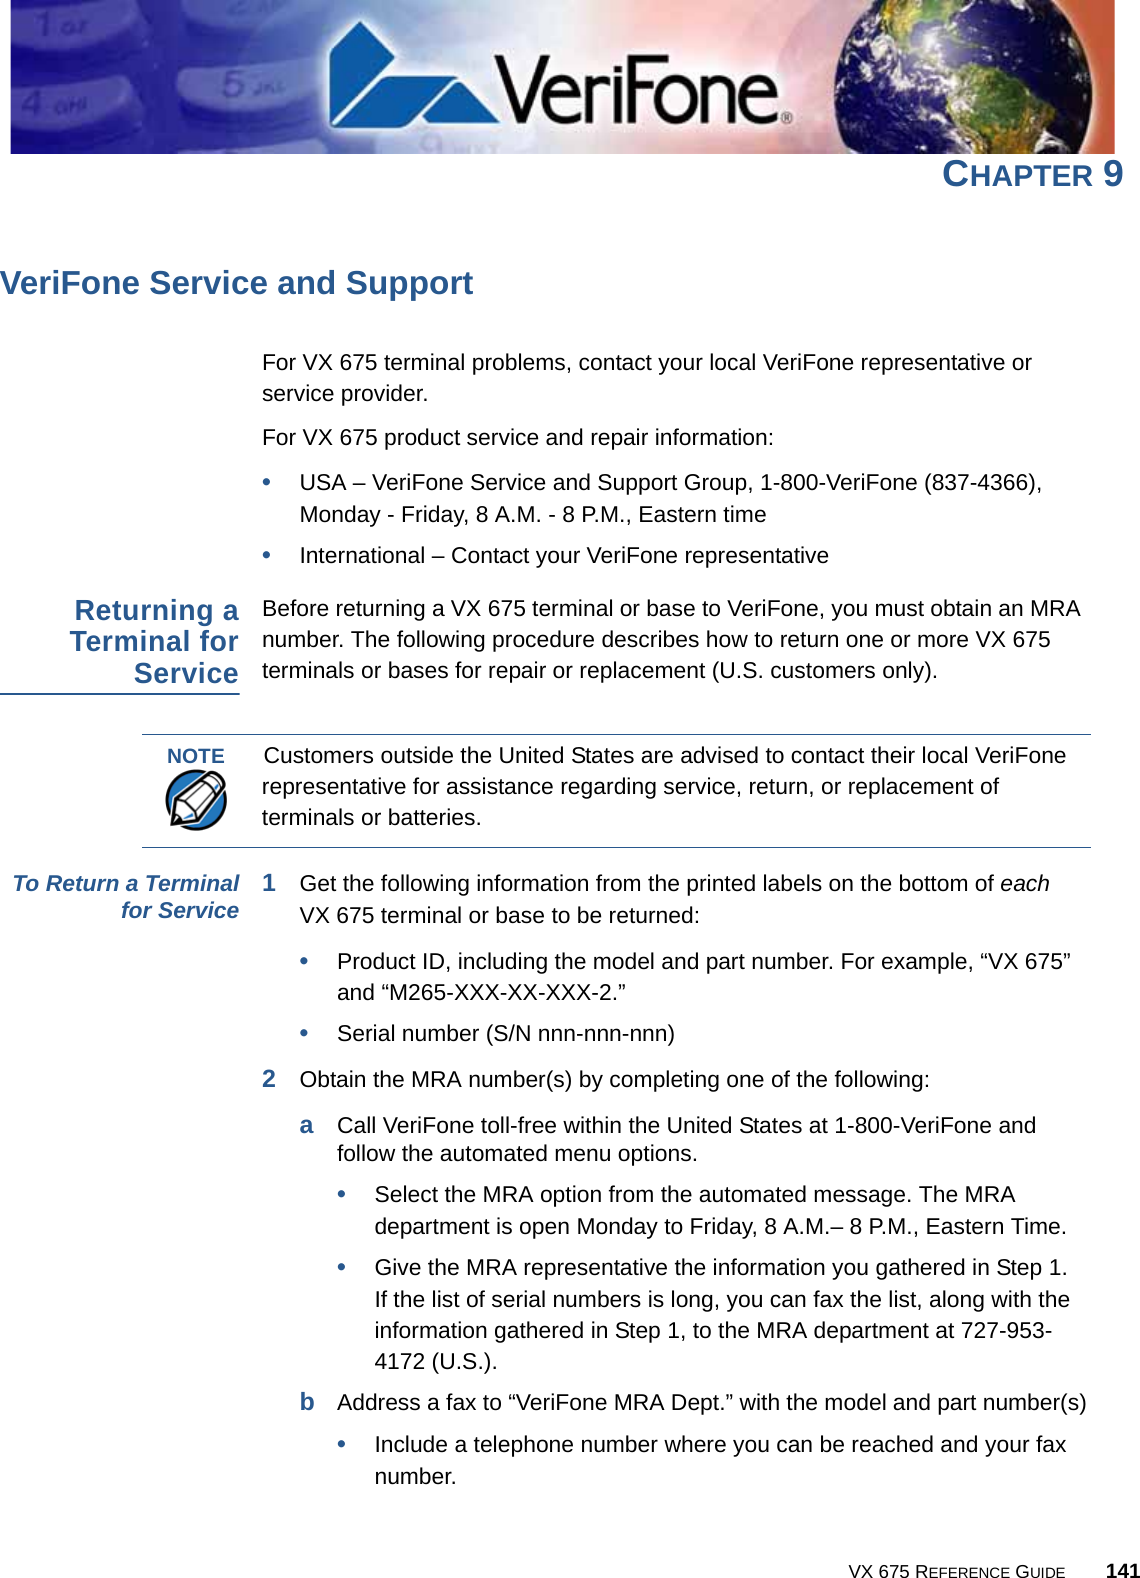 VX 675 REFERENCE GUIDE 141CHAPTER 9VeriFone Service and SupportFor VX 675 terminal problems, contact your local VeriFone representative or service provider. For VX 675 product service and repair information:•USA – VeriFone Service and Support Group, 1-800-VeriFone (837-4366), Monday - Friday, 8 A.M. - 8 P.M., Eastern time•International – Contact your VeriFone representative Returning aTerminal forServiceBefore returning a VX 675 terminal or base to VeriFone, you must obtain an MRA number. The following procedure describes how to return one or more VX 675 terminals or bases for repair or replacement (U.S. customers only). To Return a Terminalfor Service 1Get the following information from the printed labels on the bottom of each VX 675 terminal or base to be returned:•Product ID, including the model and part number. For example, “VX 675” and “M265-XXX-XX-XXX-2.”•Serial number (S/N nnn-nnn-nnn)2Obtain the MRA number(s) by completing one of the following:aCall VeriFone toll-free within the United States at 1-800-VeriFone and follow the automated menu options.•Select the MRA option from the automated message. The MRA department is open Monday to Friday, 8 A.M.– 8 P.M., Eastern Time.•Give the MRA representative the information you gathered in Step 1.If the list of serial numbers is long, you can fax the list, along with the information gathered in Step 1, to the MRA department at 727-953-4172 (U.S.).bAddress a fax to “VeriFone MRA Dept.” with the model and part number(s)•Include a telephone number where you can be reached and your fax number.NOTECustomers outside the United States are advised to contact their local VeriFone representative for assistance regarding service, return, or replacement of terminals or batteries.